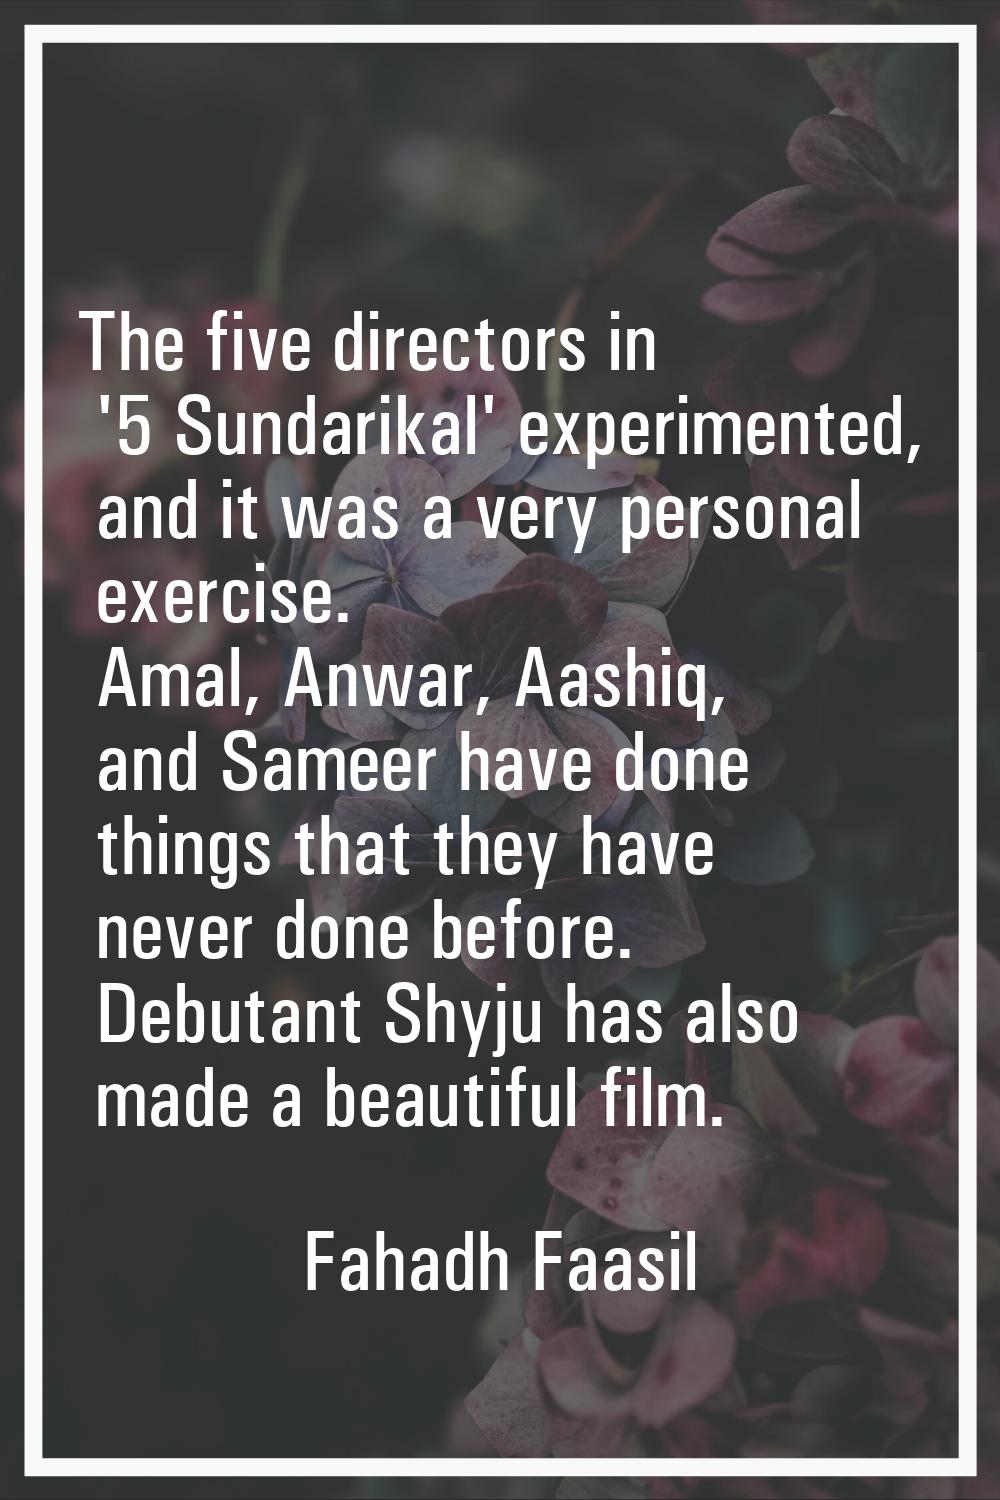 The five directors in '5 Sundarikal' experimented, and it was a very personal exercise. Amal, Anwar